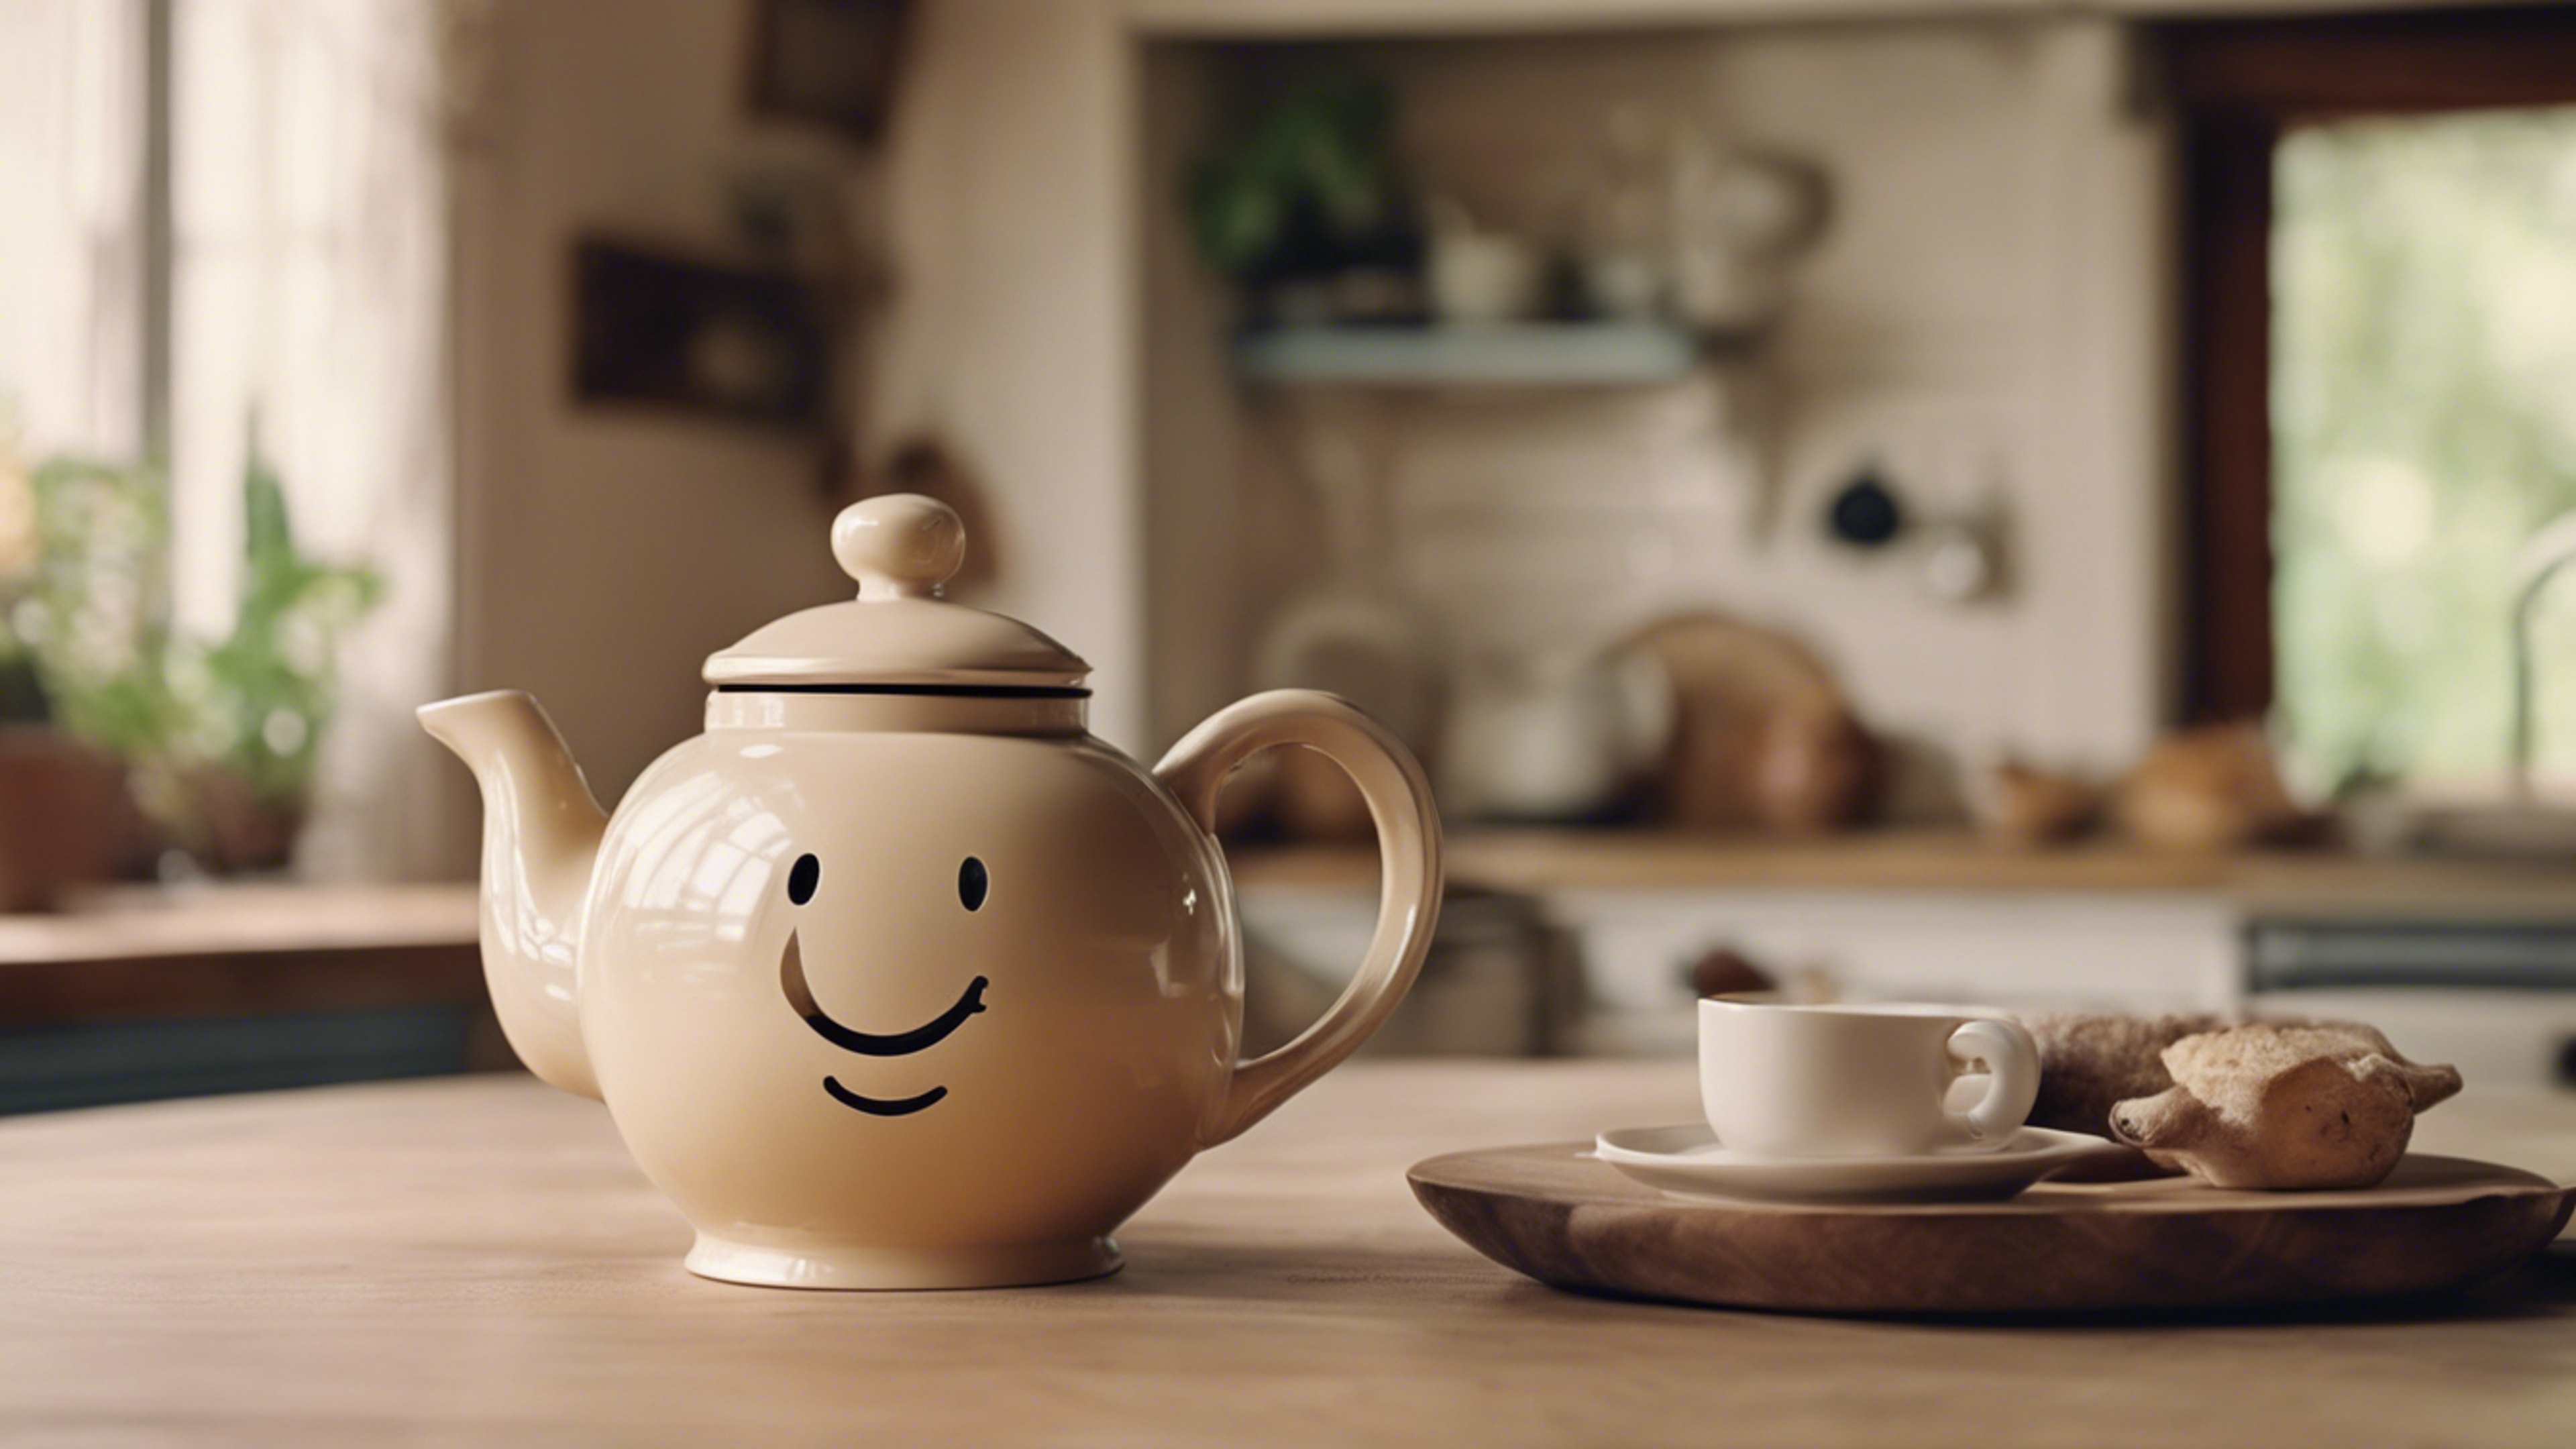 A cute beige teapot with a smiley face, sat on a charming farmhouse-style kitchen table. Wallpaper[b69ce7e5d7744e798112]